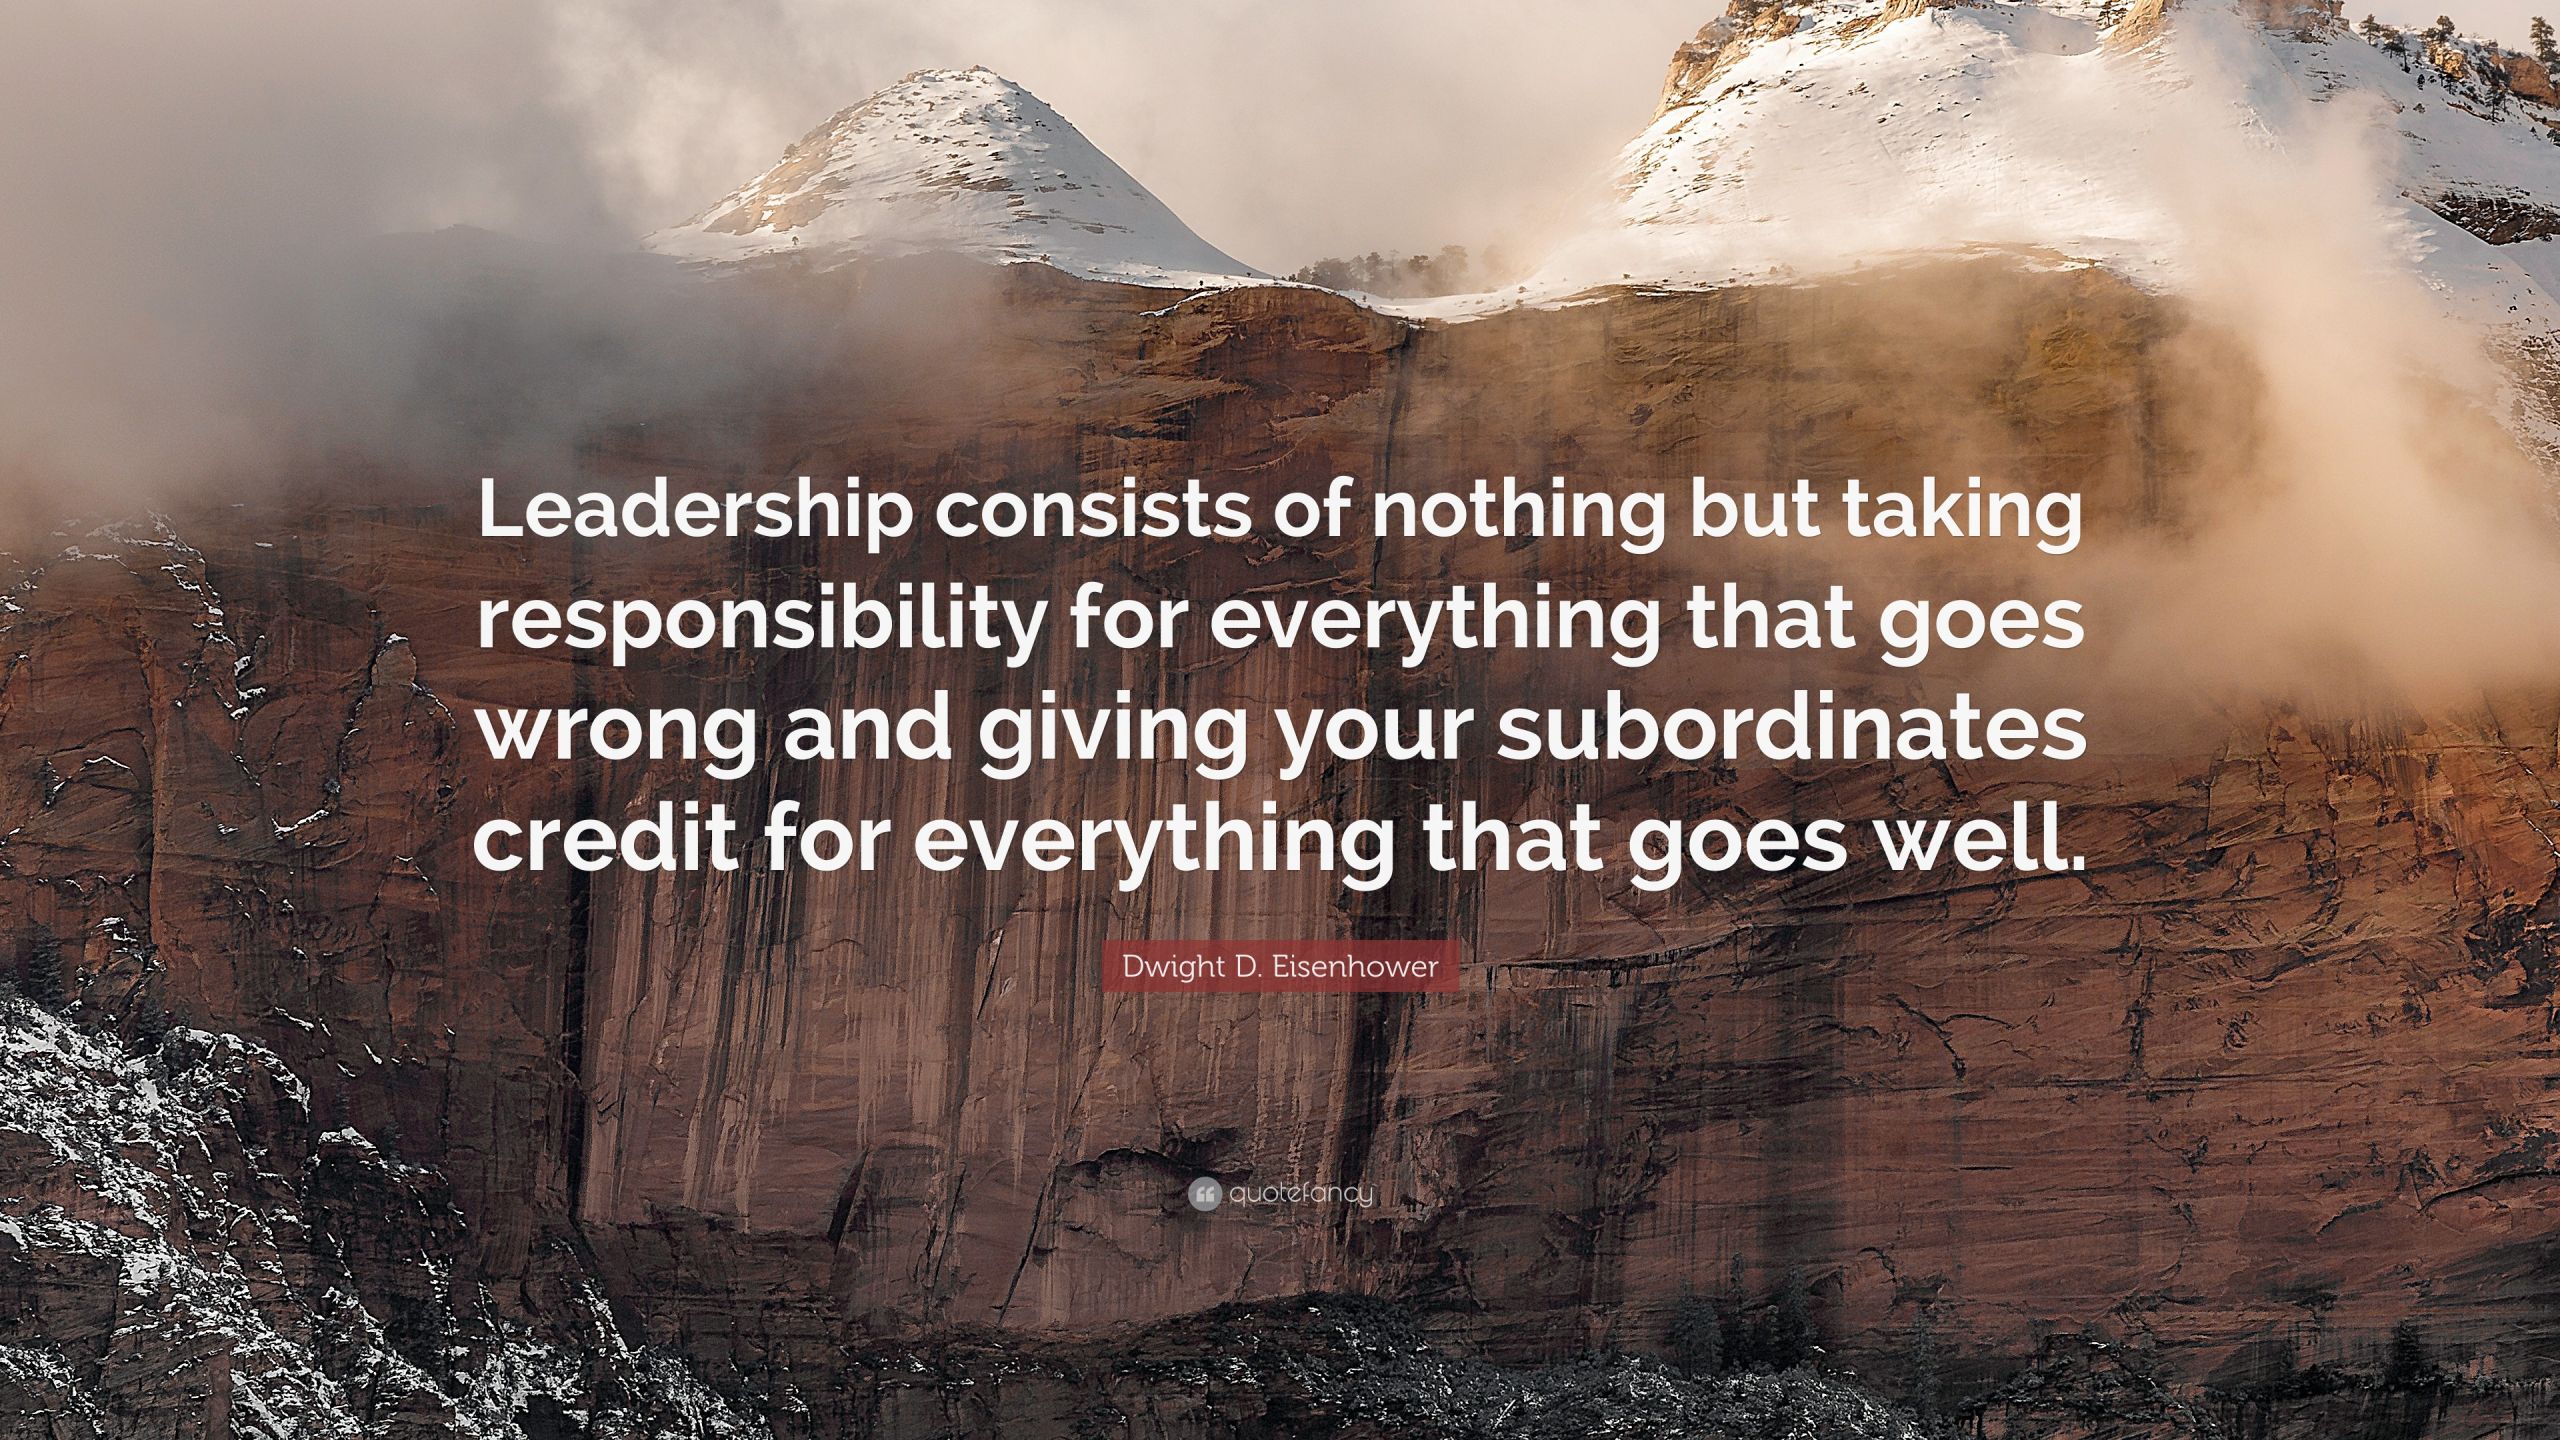 Eisenhower Leadership Quote
 Dwight D Eisenhower Quote “Leadership consists of